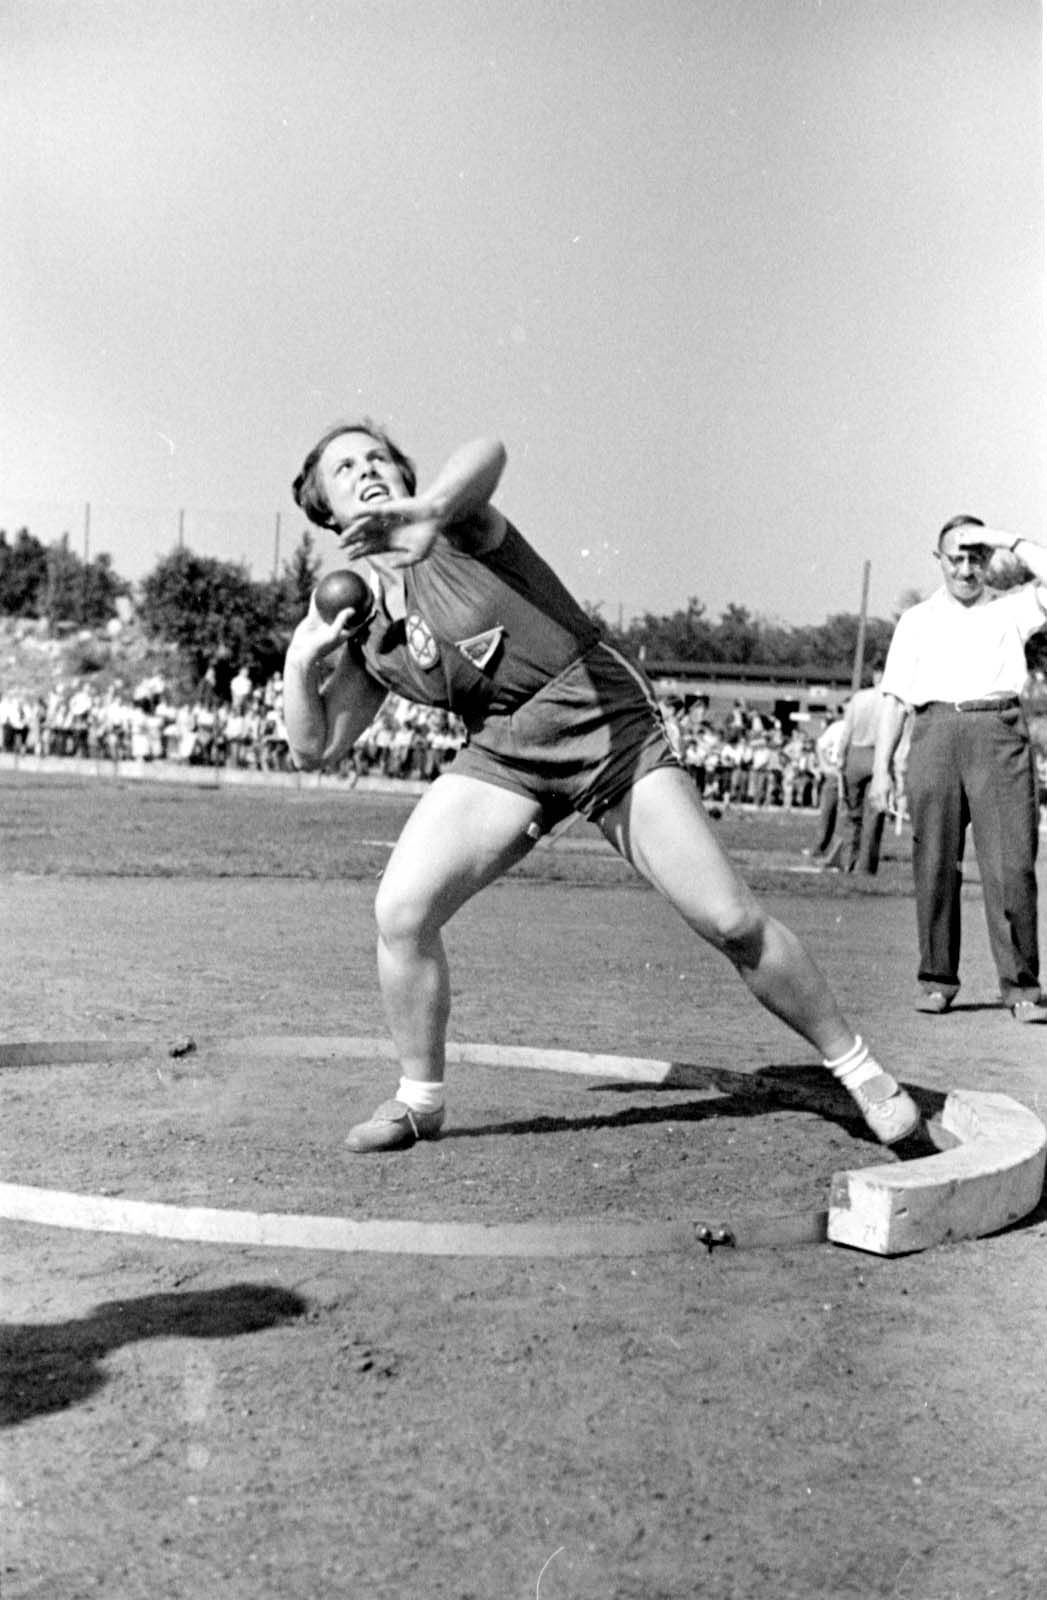 Berlin, Germany, 1937, Selma Schulmann in the shot-put event at the "Bar-Kochba" international sports games with the participation of "Hakoach Vienna". The games took place at the Grunewald field and included soccer, handball and hockey.